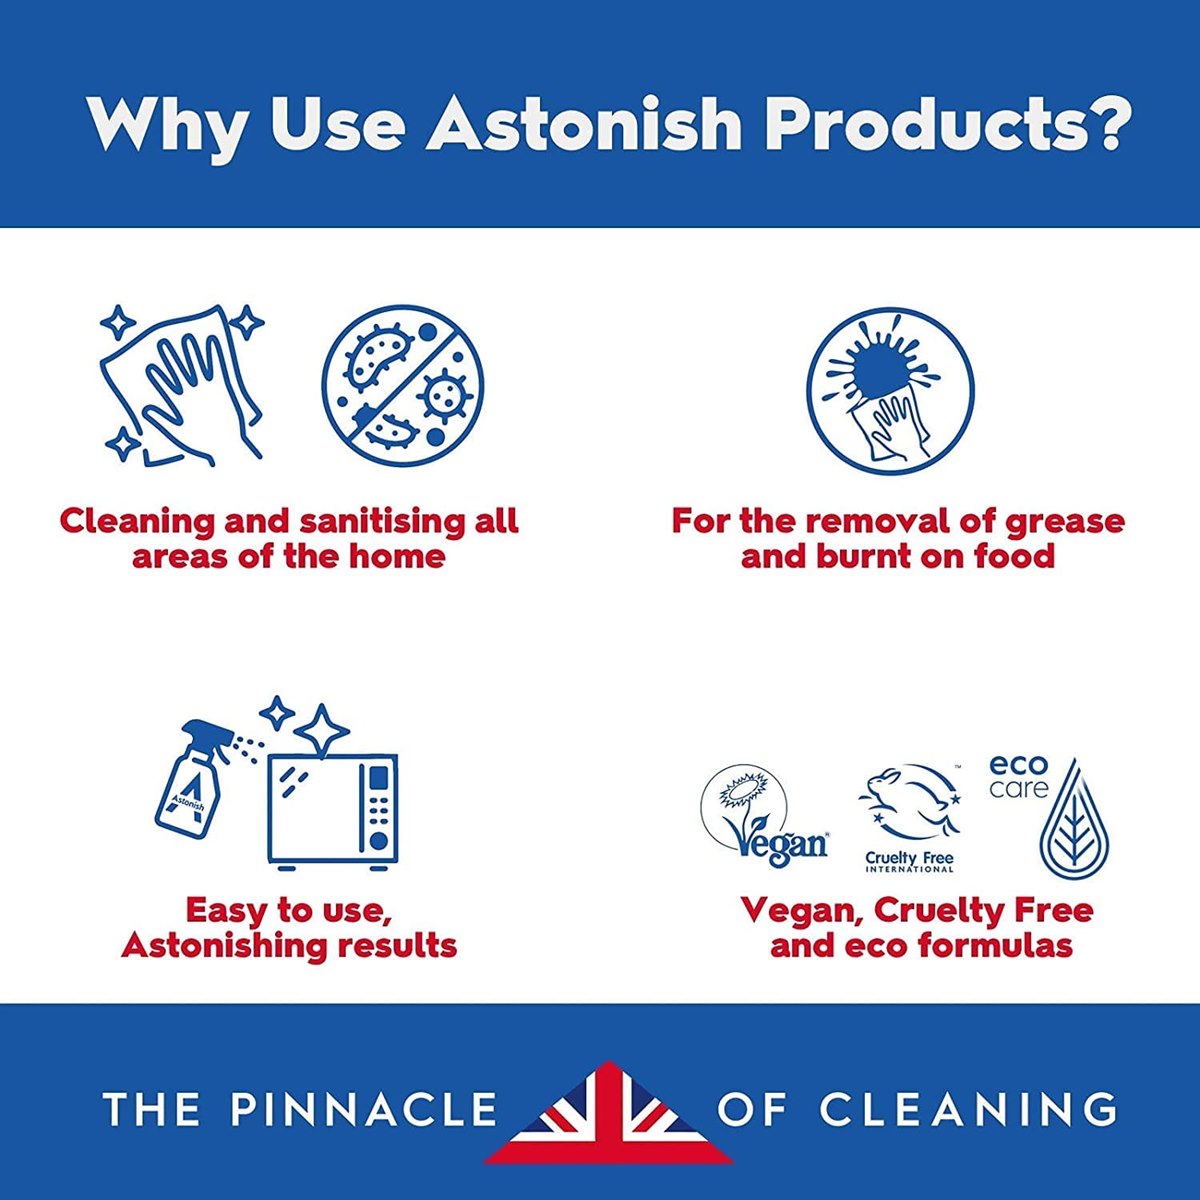 Why Use Astonish Products